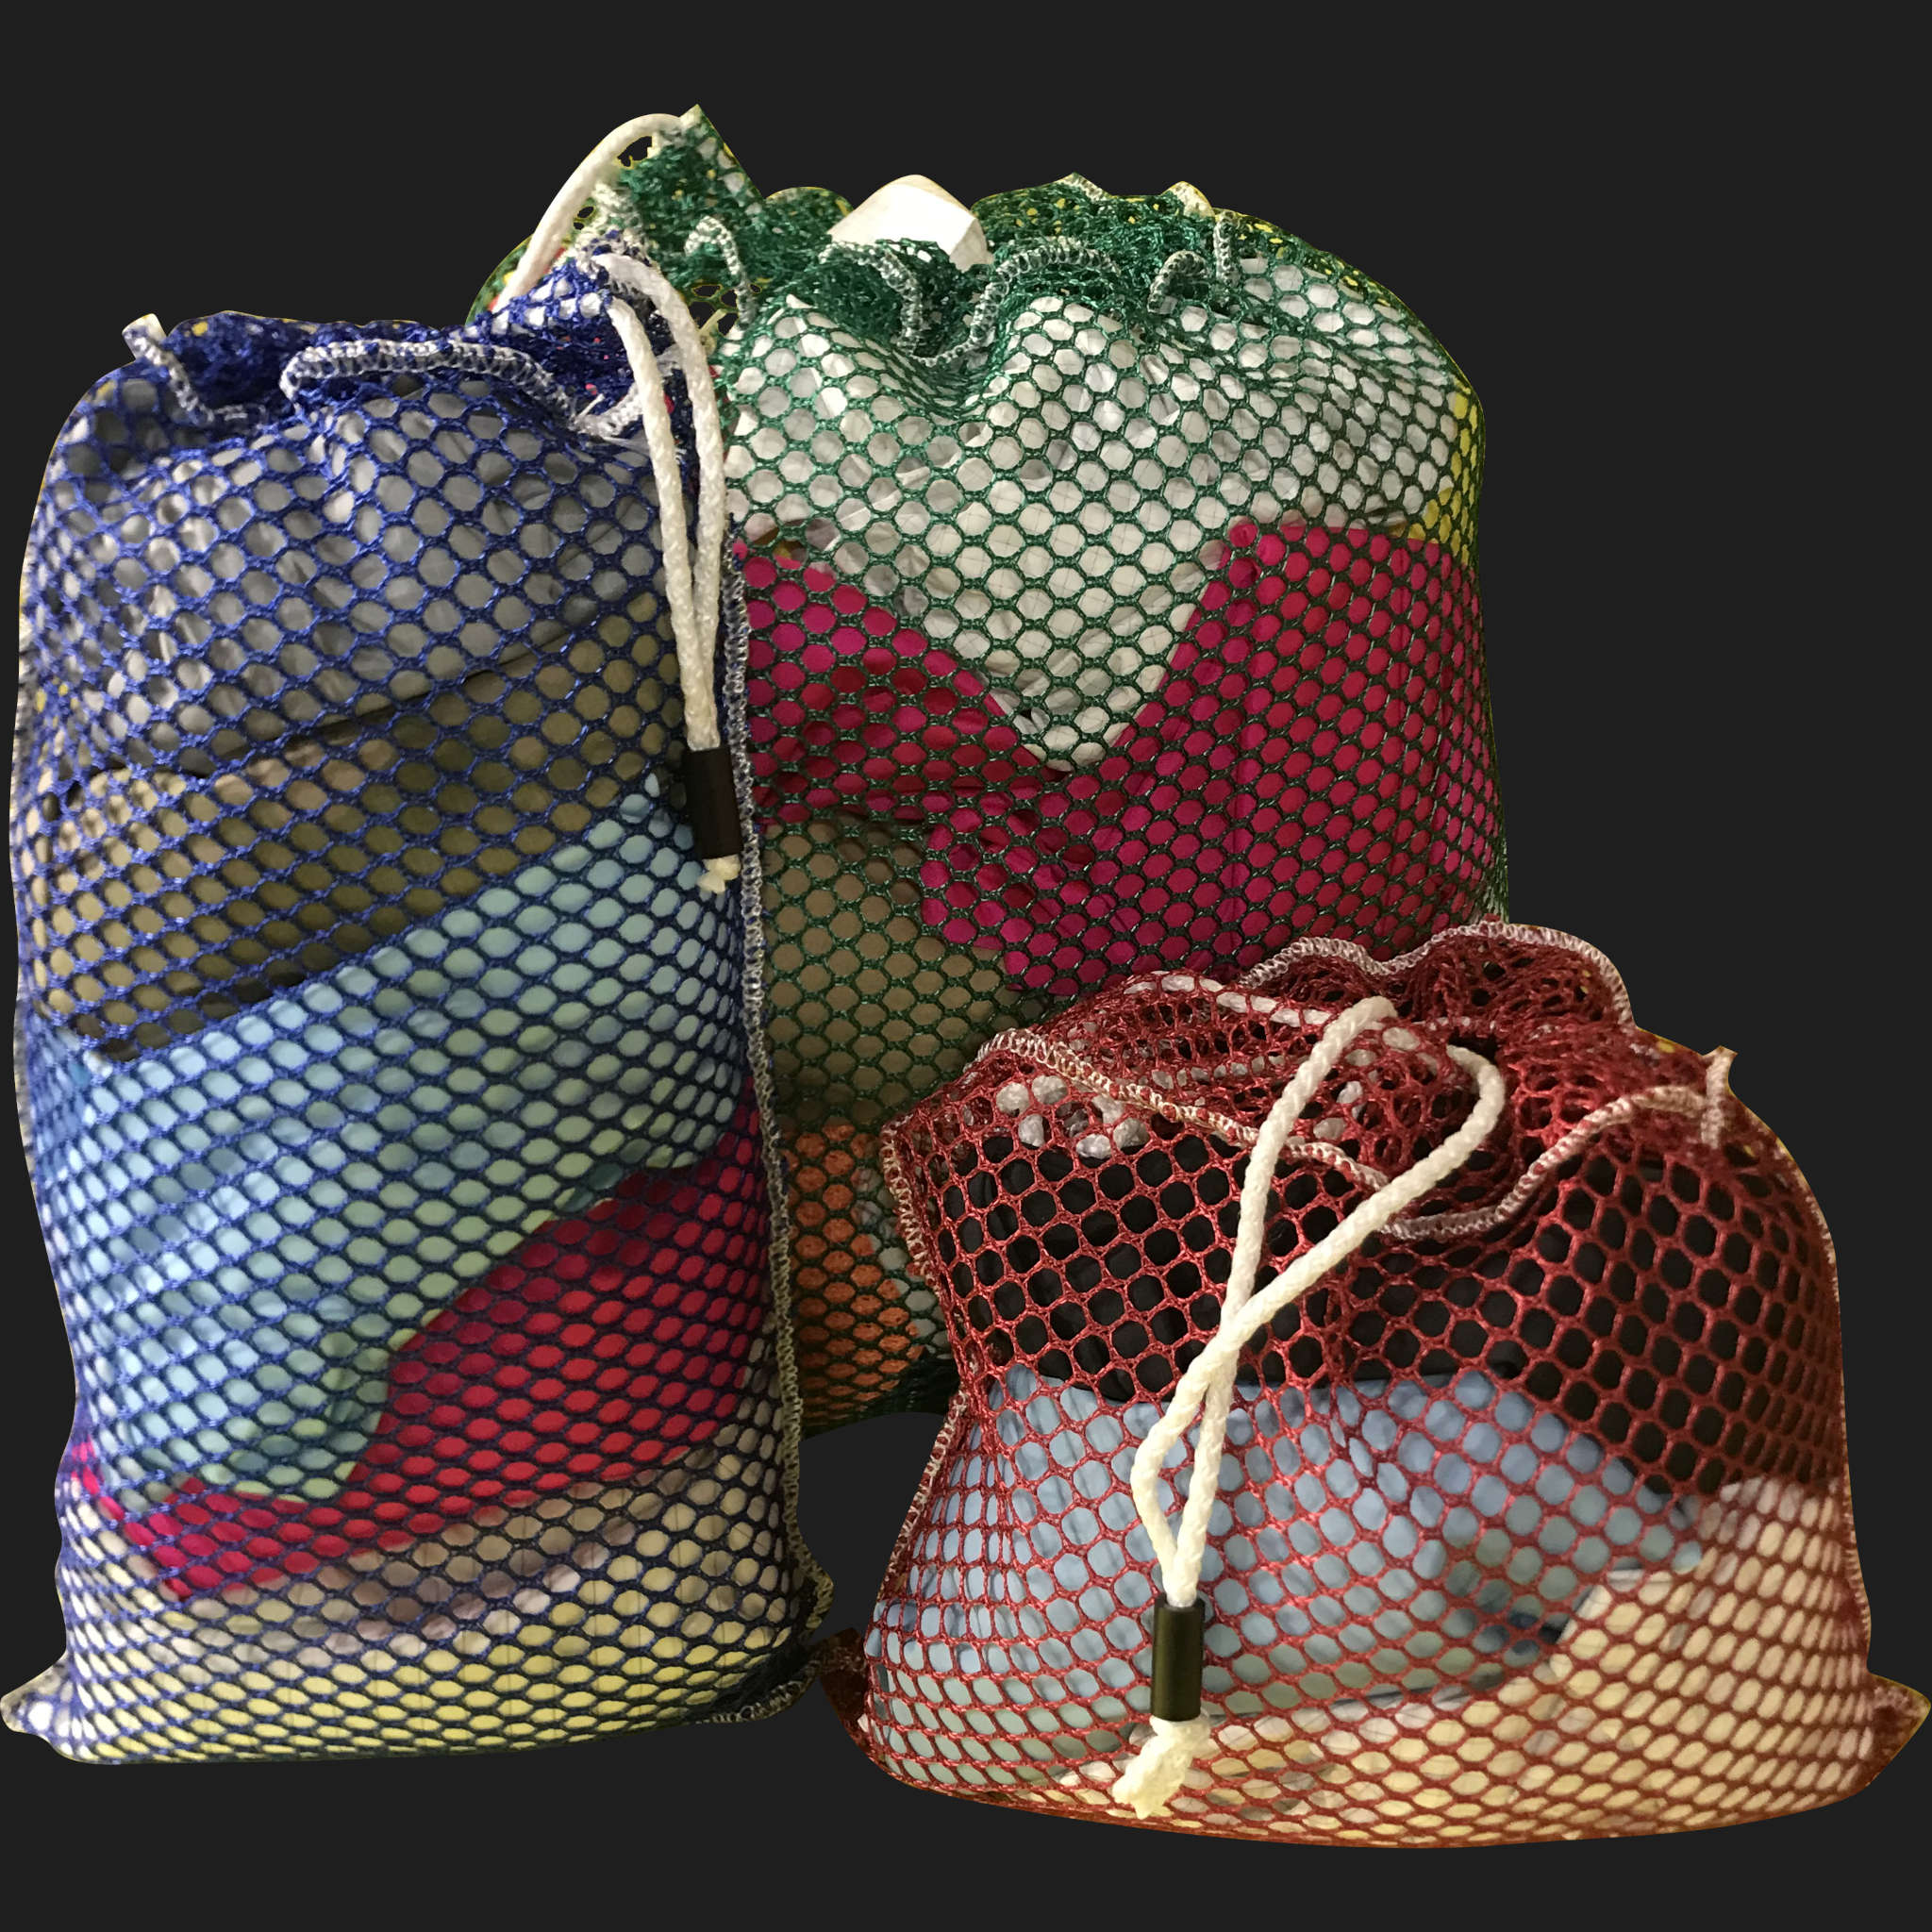 38" x 58" Customized Mesh-Net-Laundry Bags Heavy Duty with Cord and barrellock closure